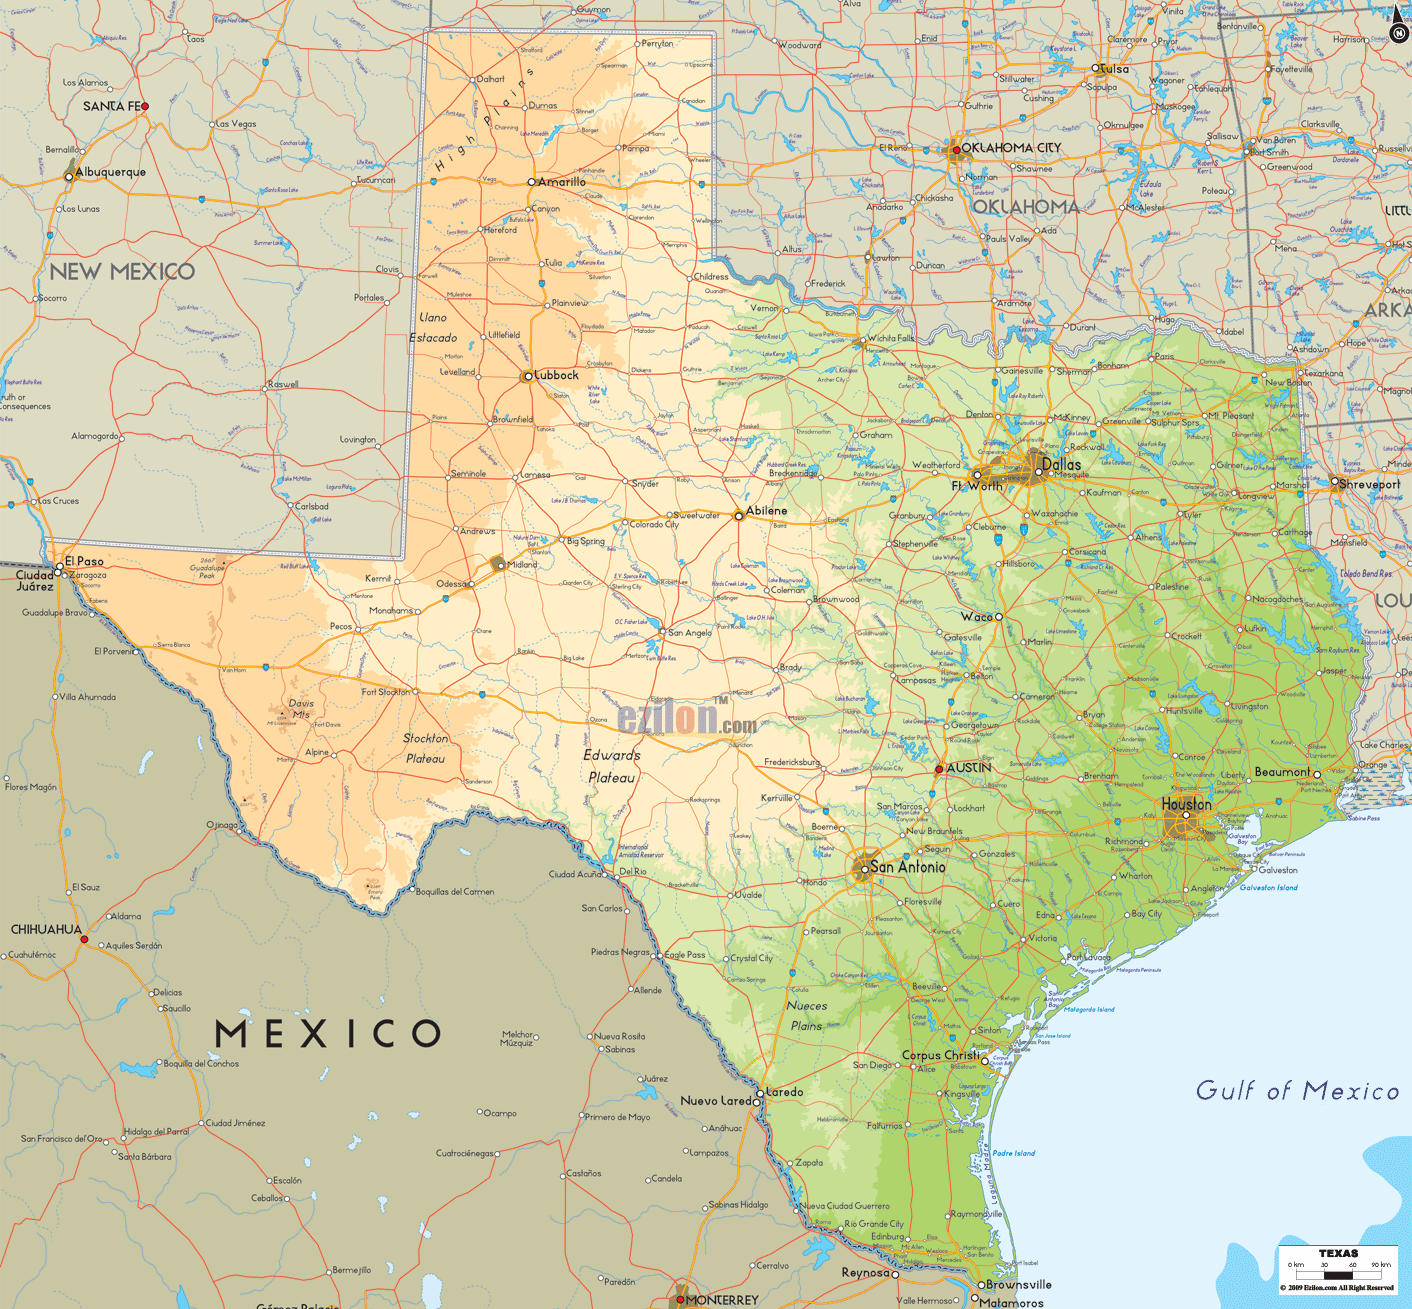 The Physical map of Texas State, USA showing major geographical features such as rivers, lakes, topography and land formations.